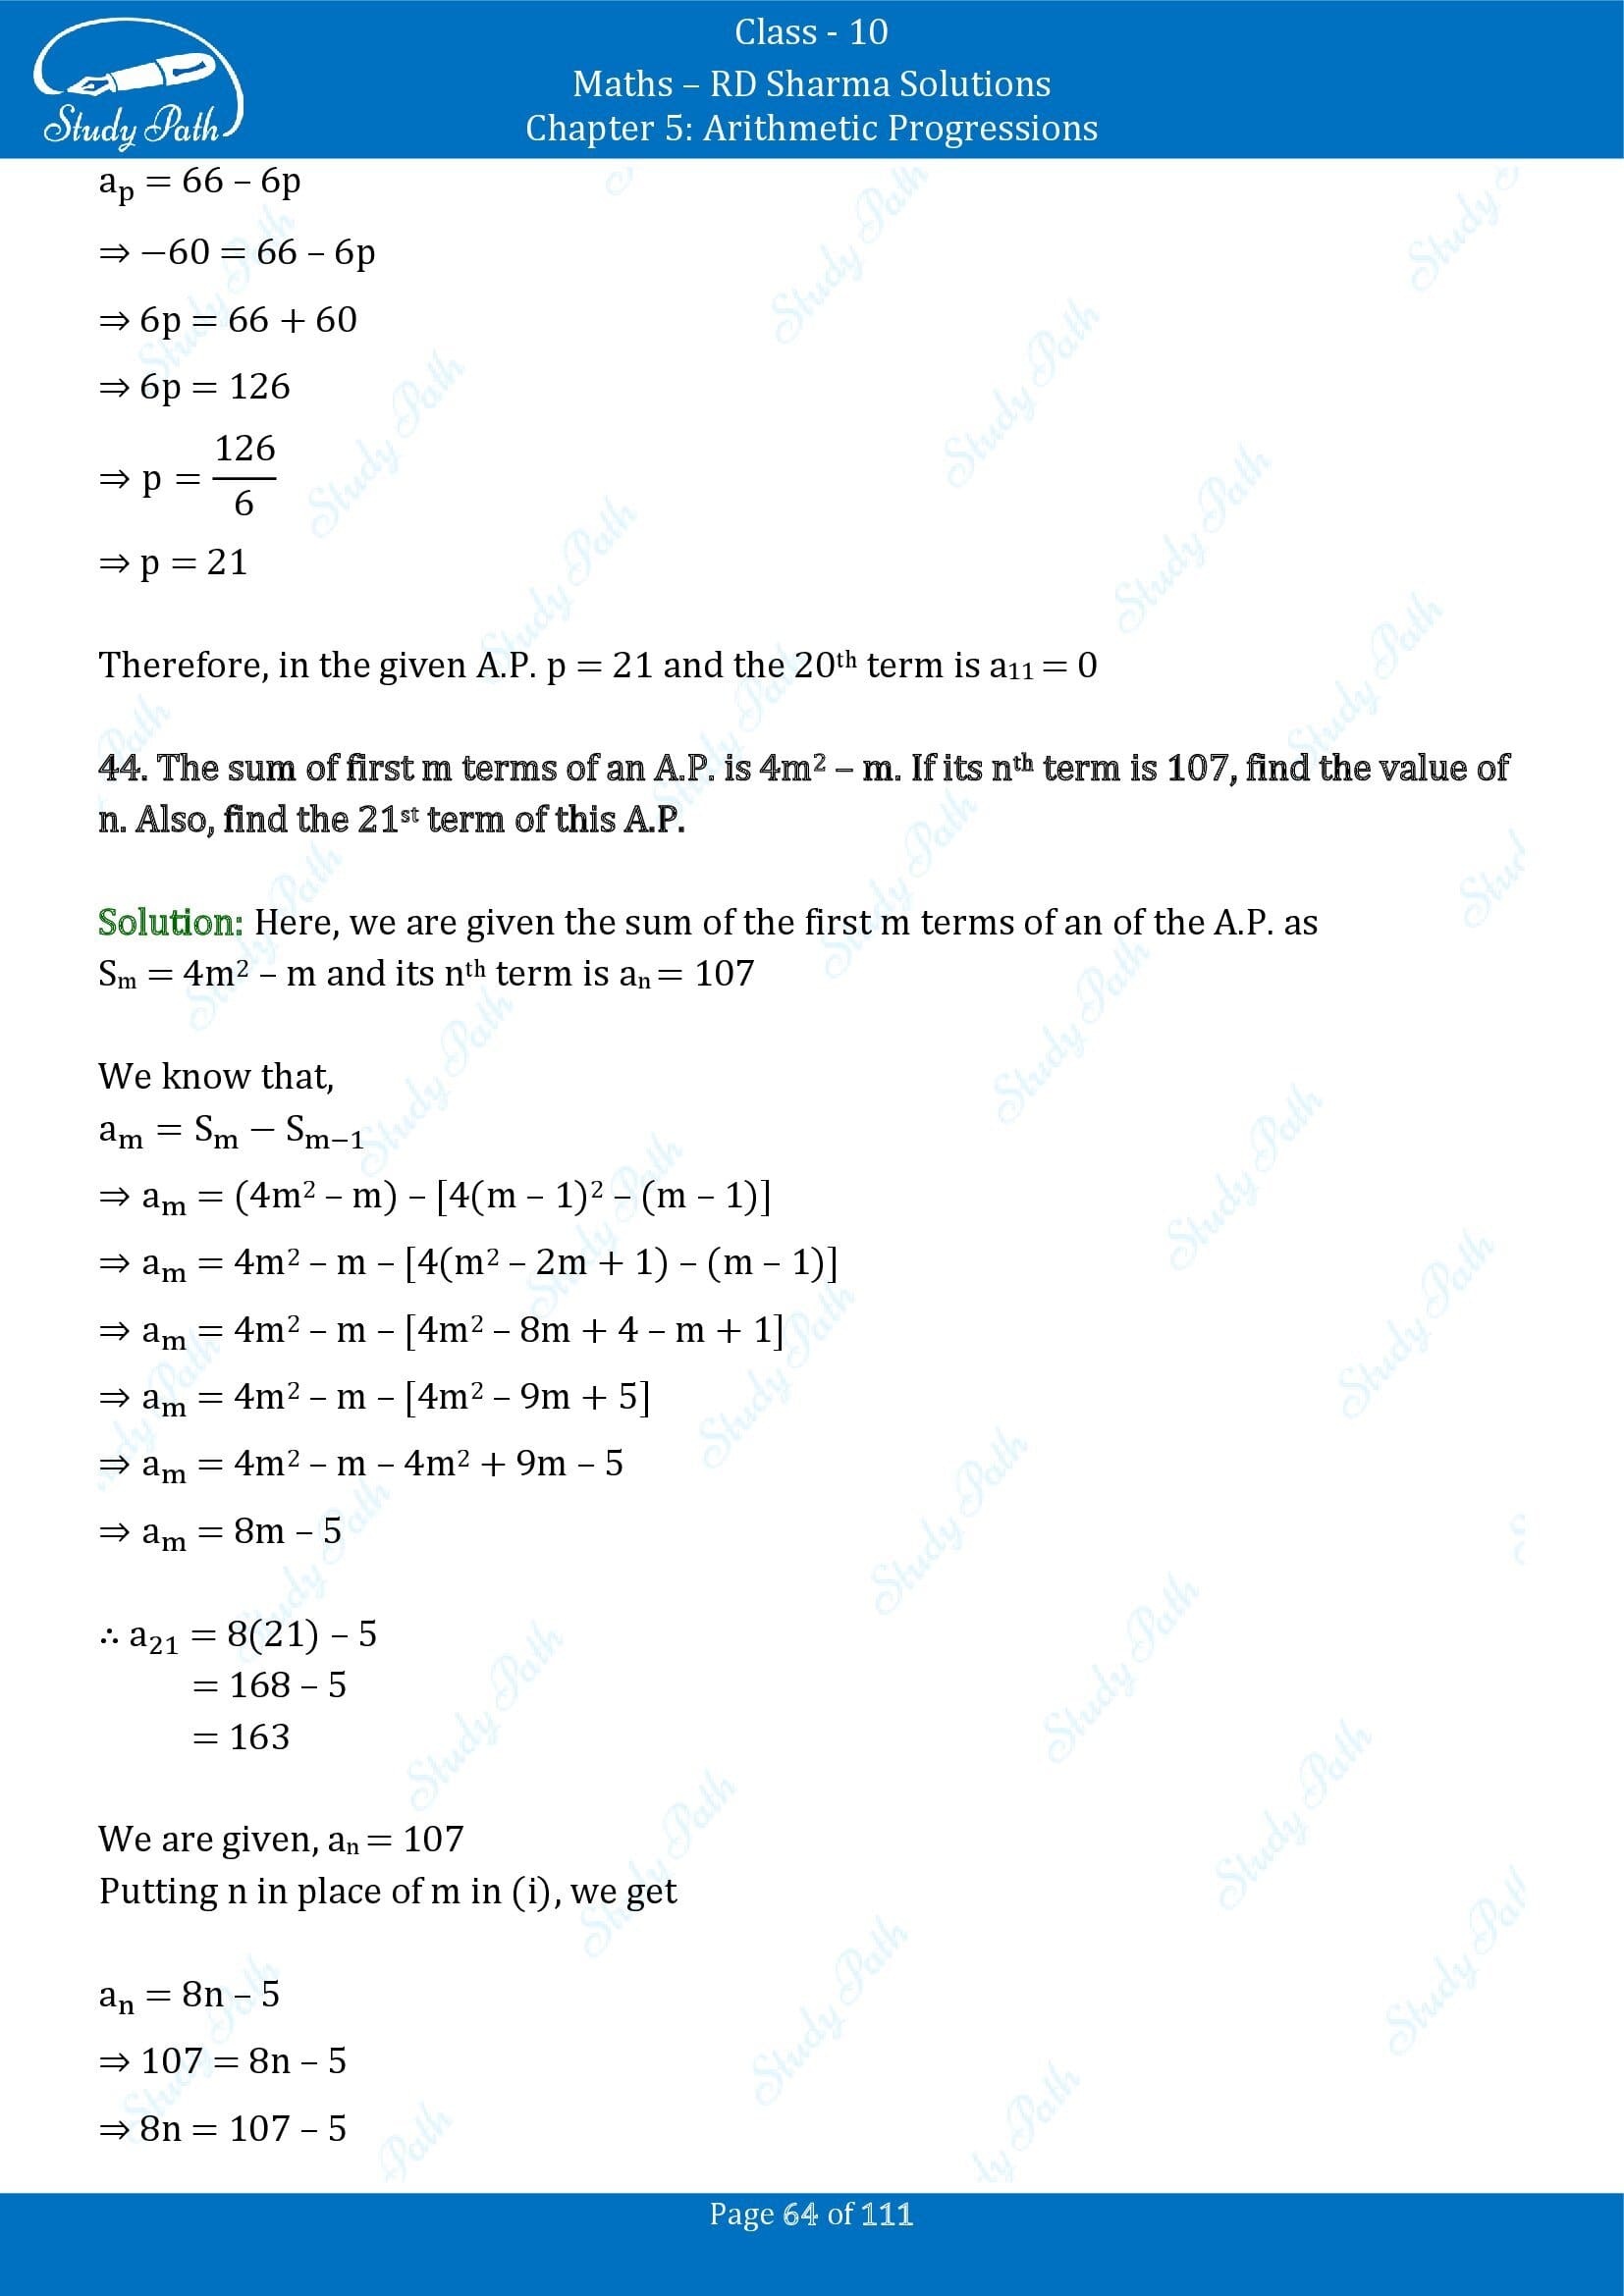 RD Sharma Solutions Class 10 Chapter 5 Arithmetic Progressions Exercise 5.6 00064